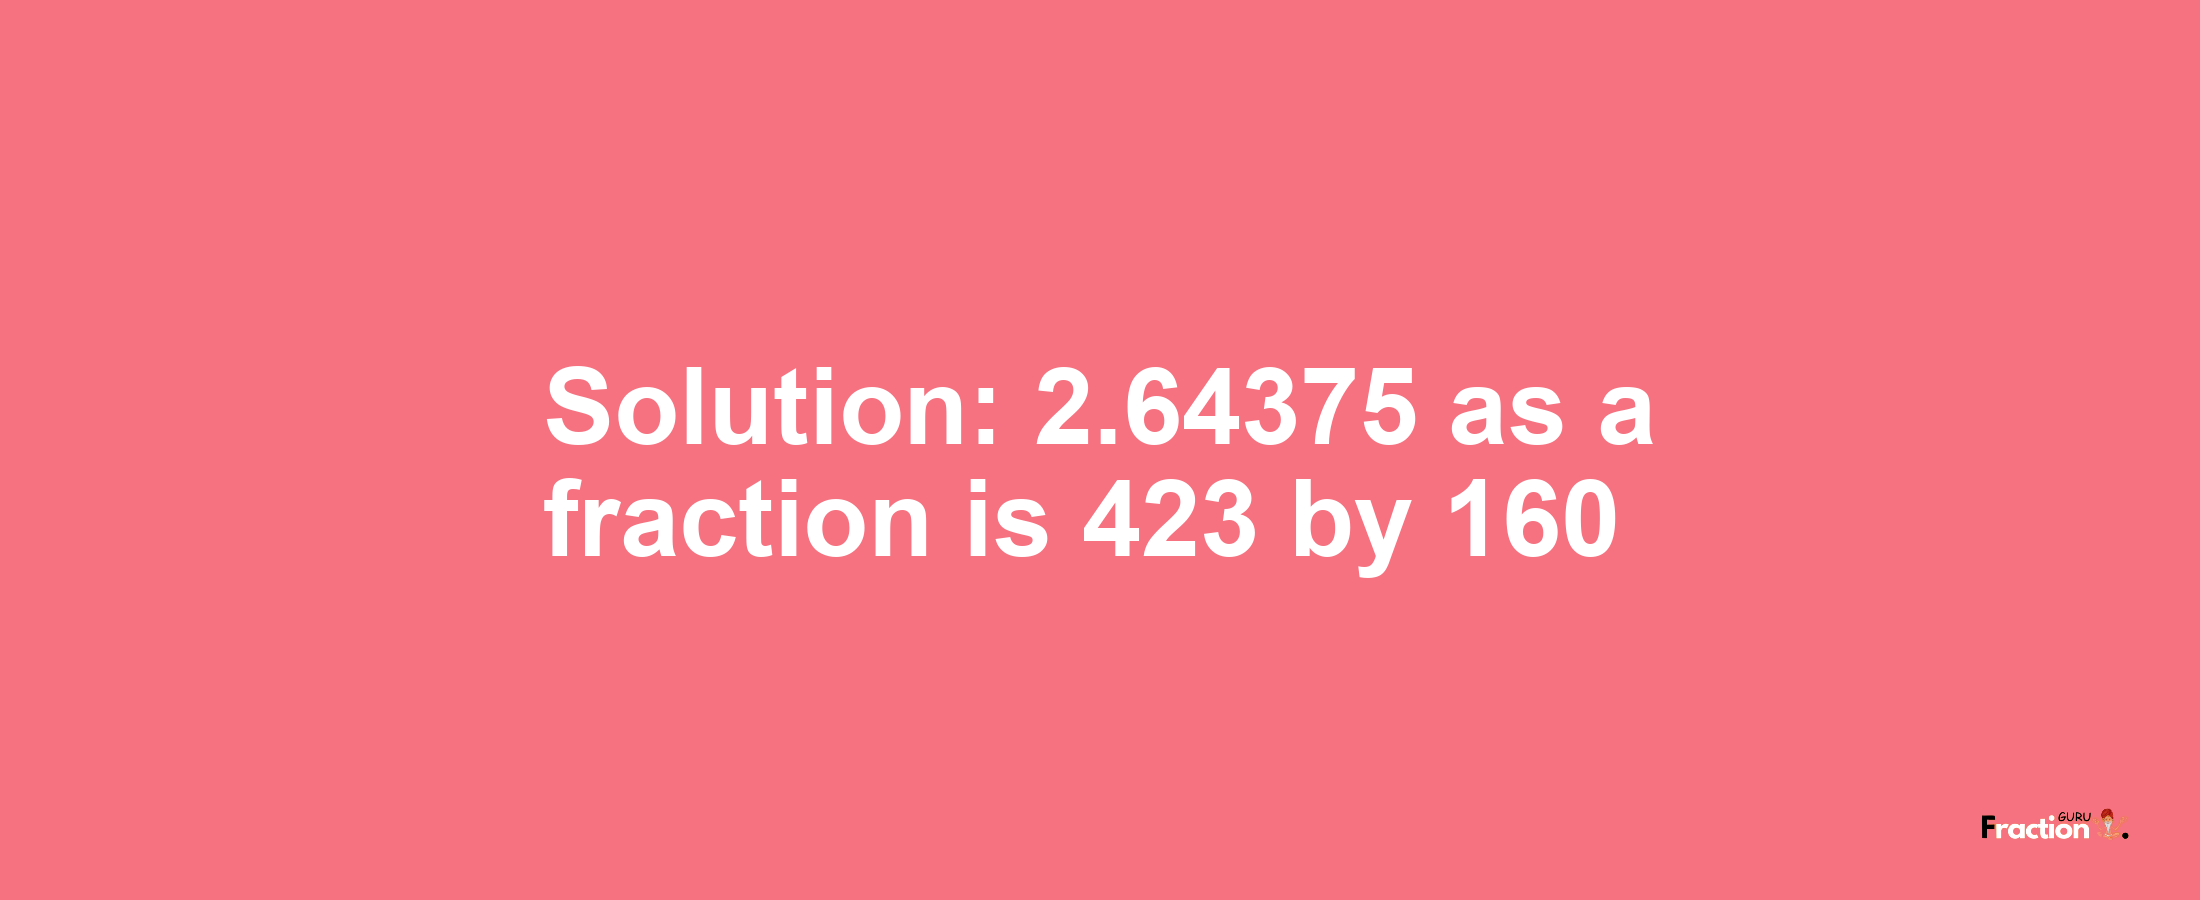 Solution:2.64375 as a fraction is 423/160